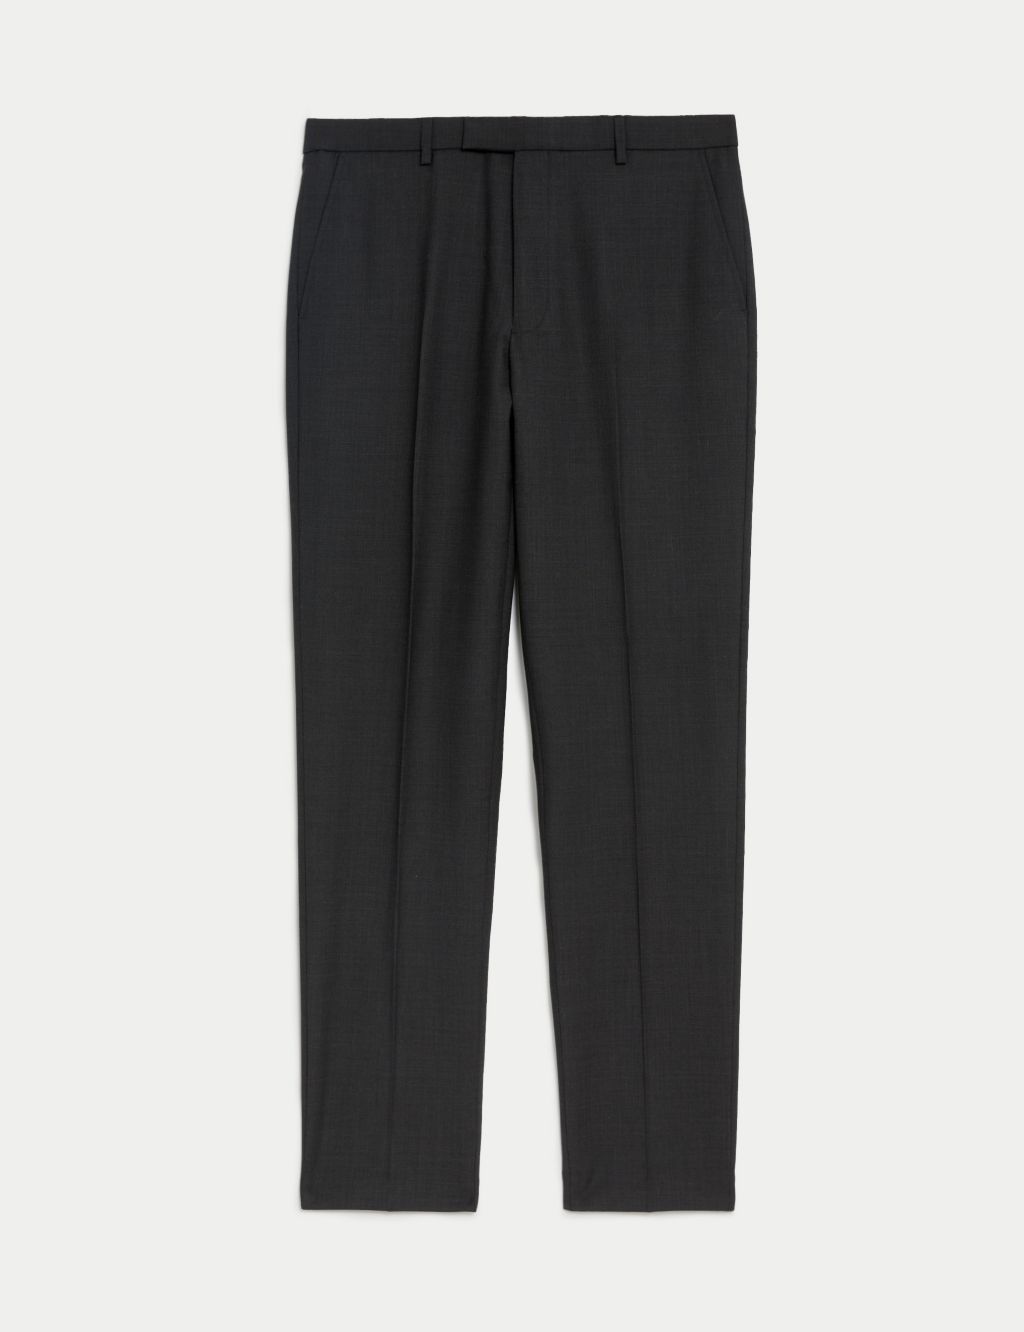 The Ultimate Tailored Fit Suit Trousers image 1